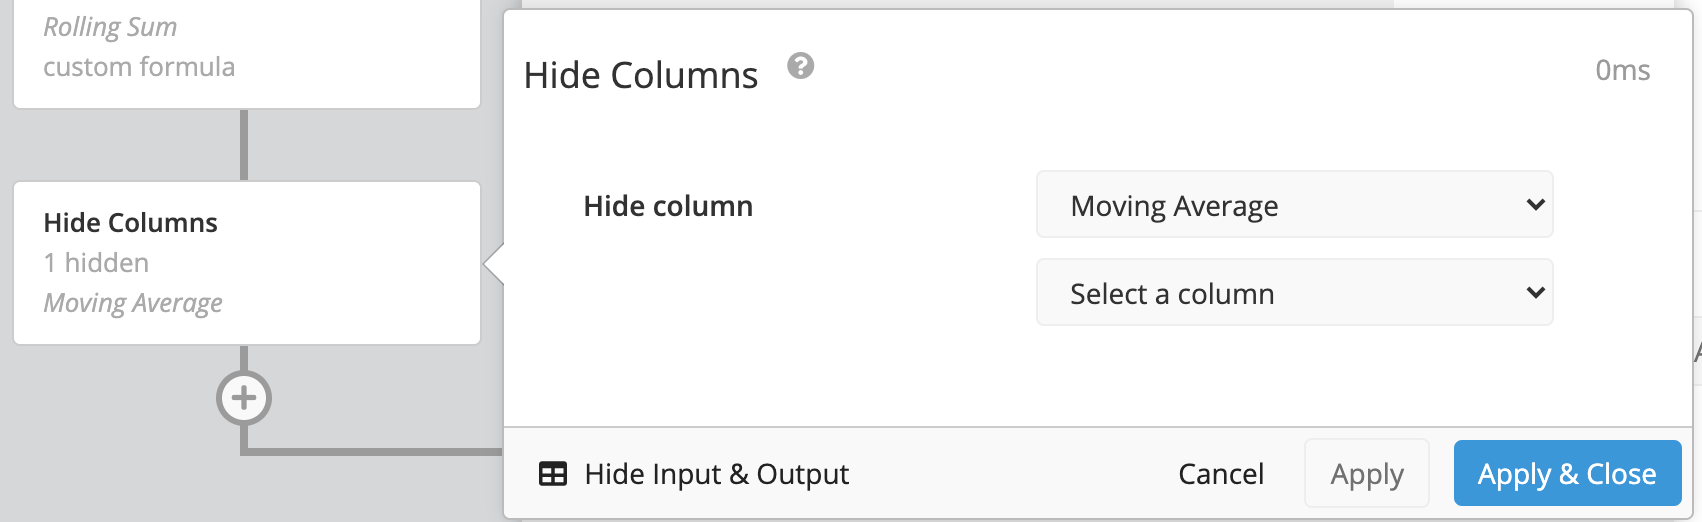 Add Hide Columns step in Pipeline to hide the Moving average column